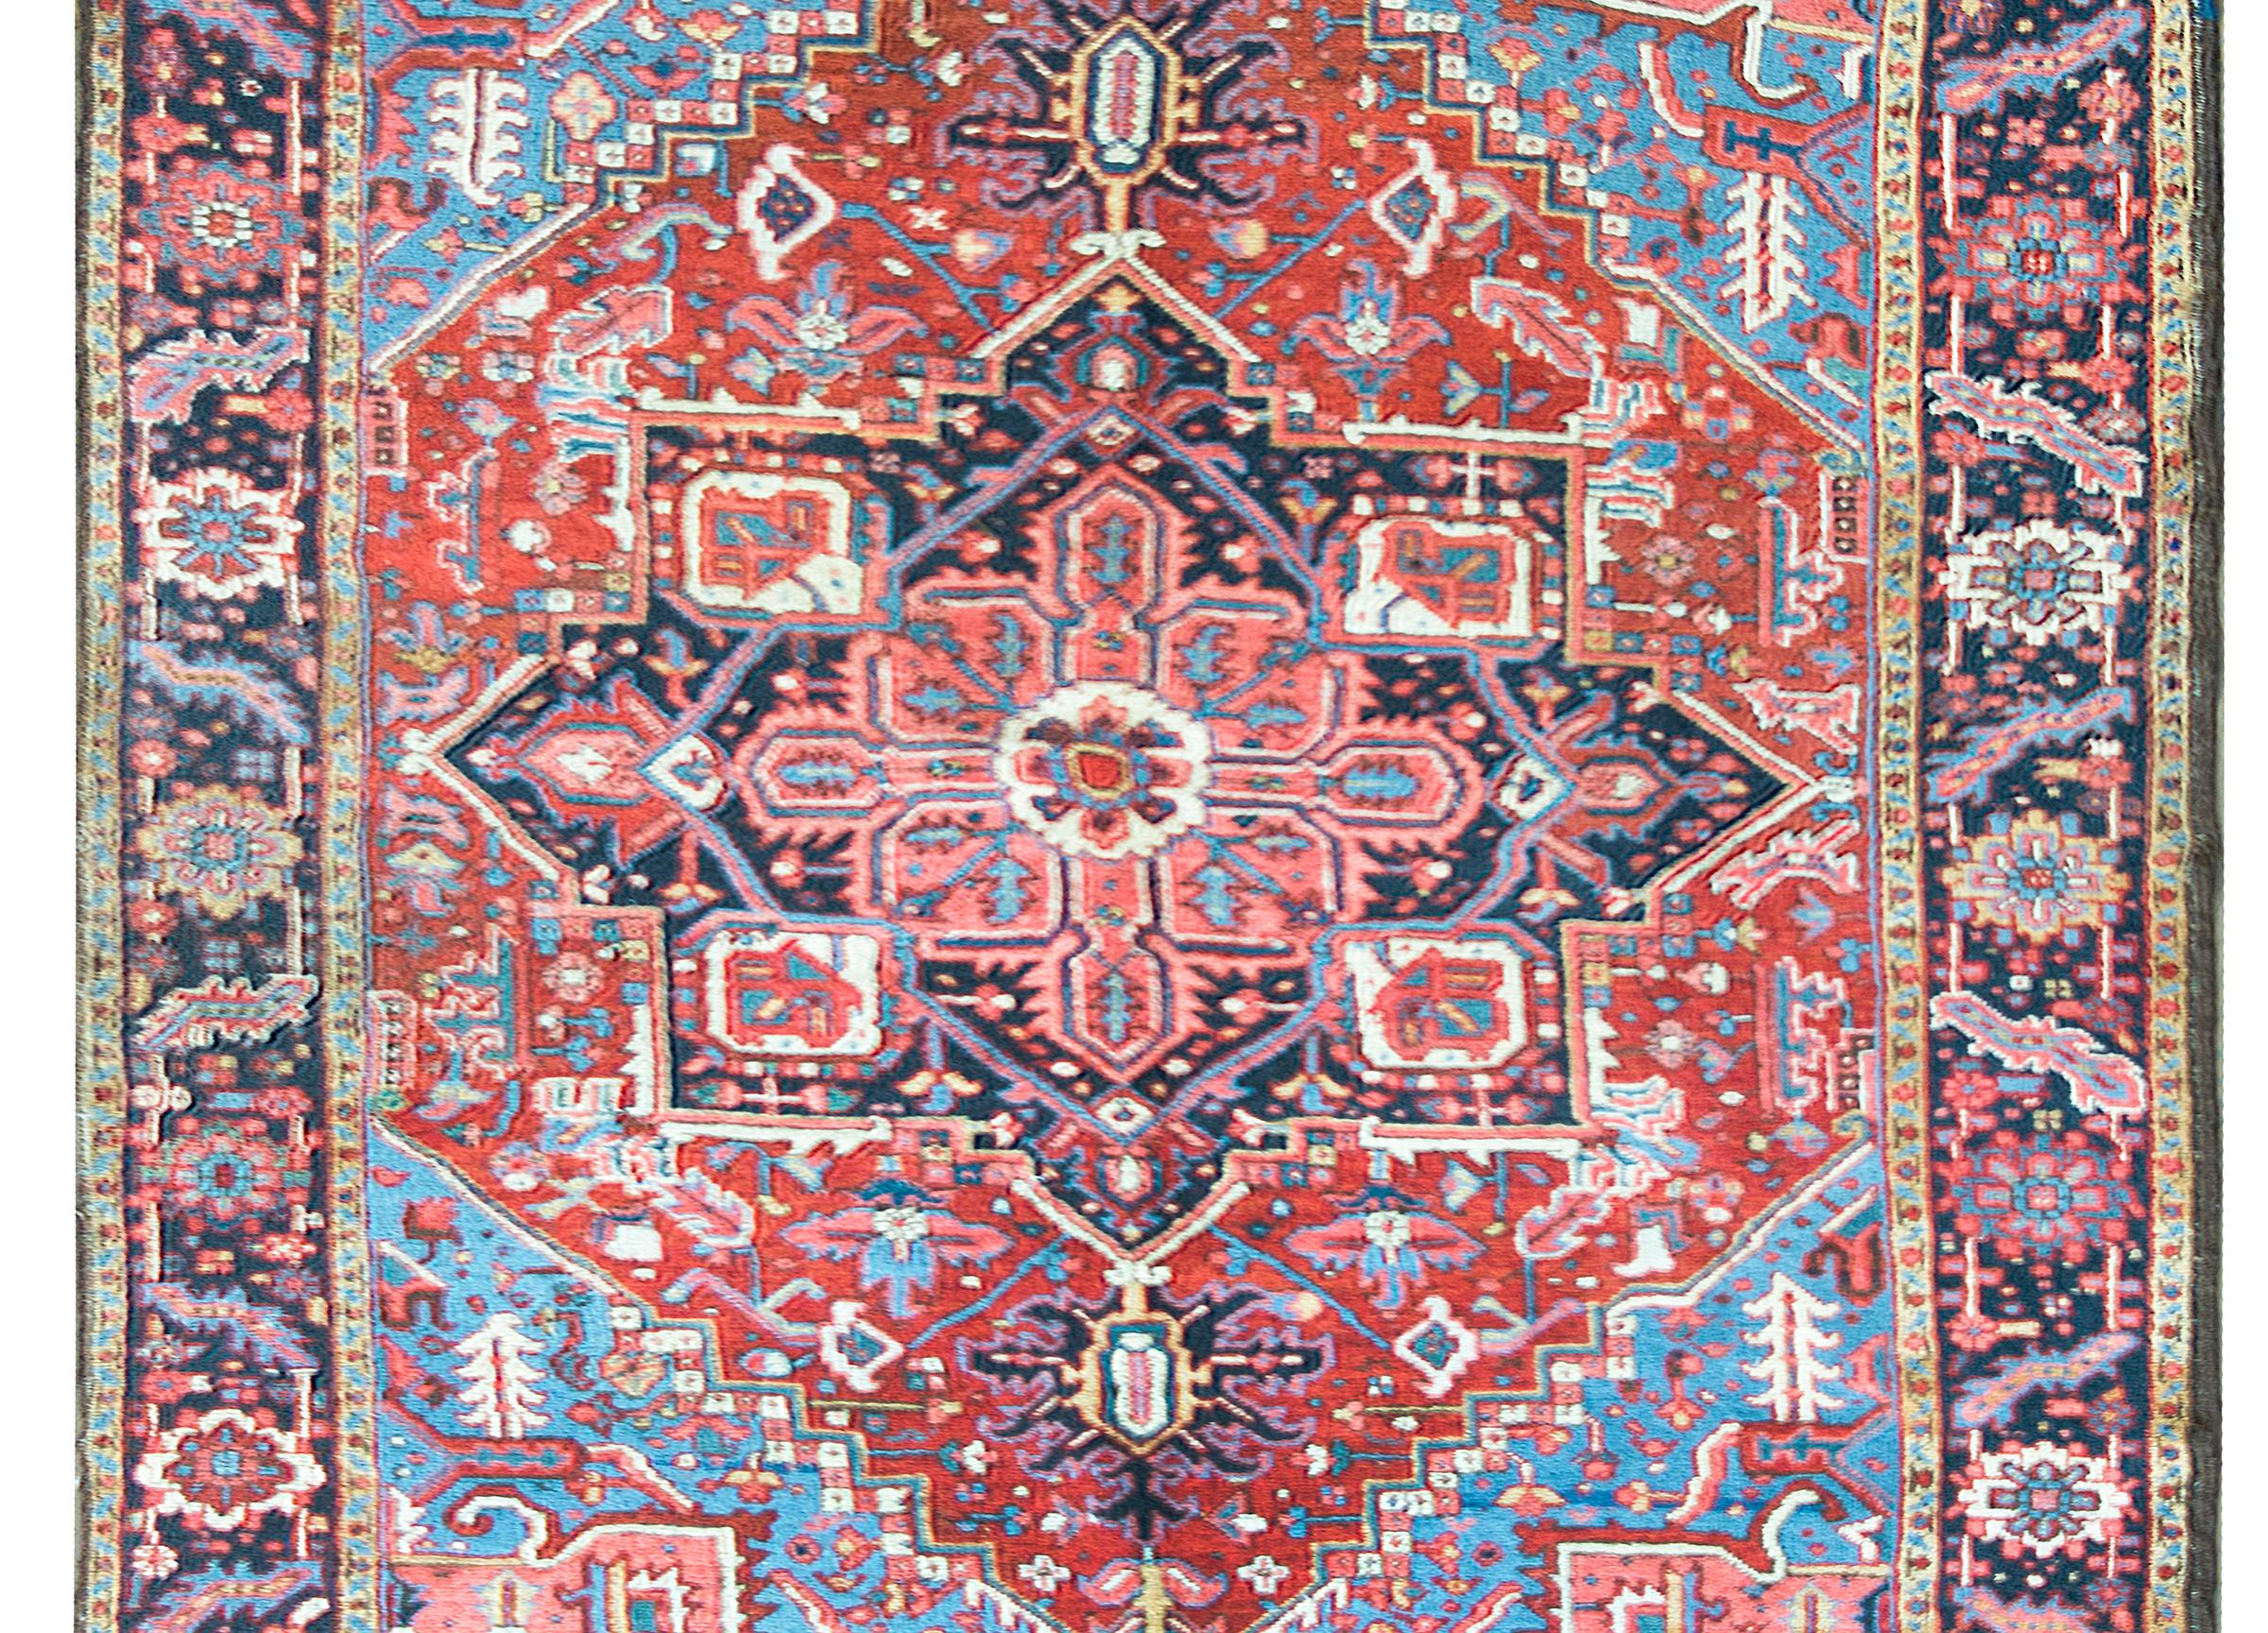 A wonderful early 20th century Persian Heriz rug with a traditional large-scale central floral medallion living amidst a field of more stylized flowers and vines, and surrounded by a wide border with a repeated large-scale floral pattern, and all